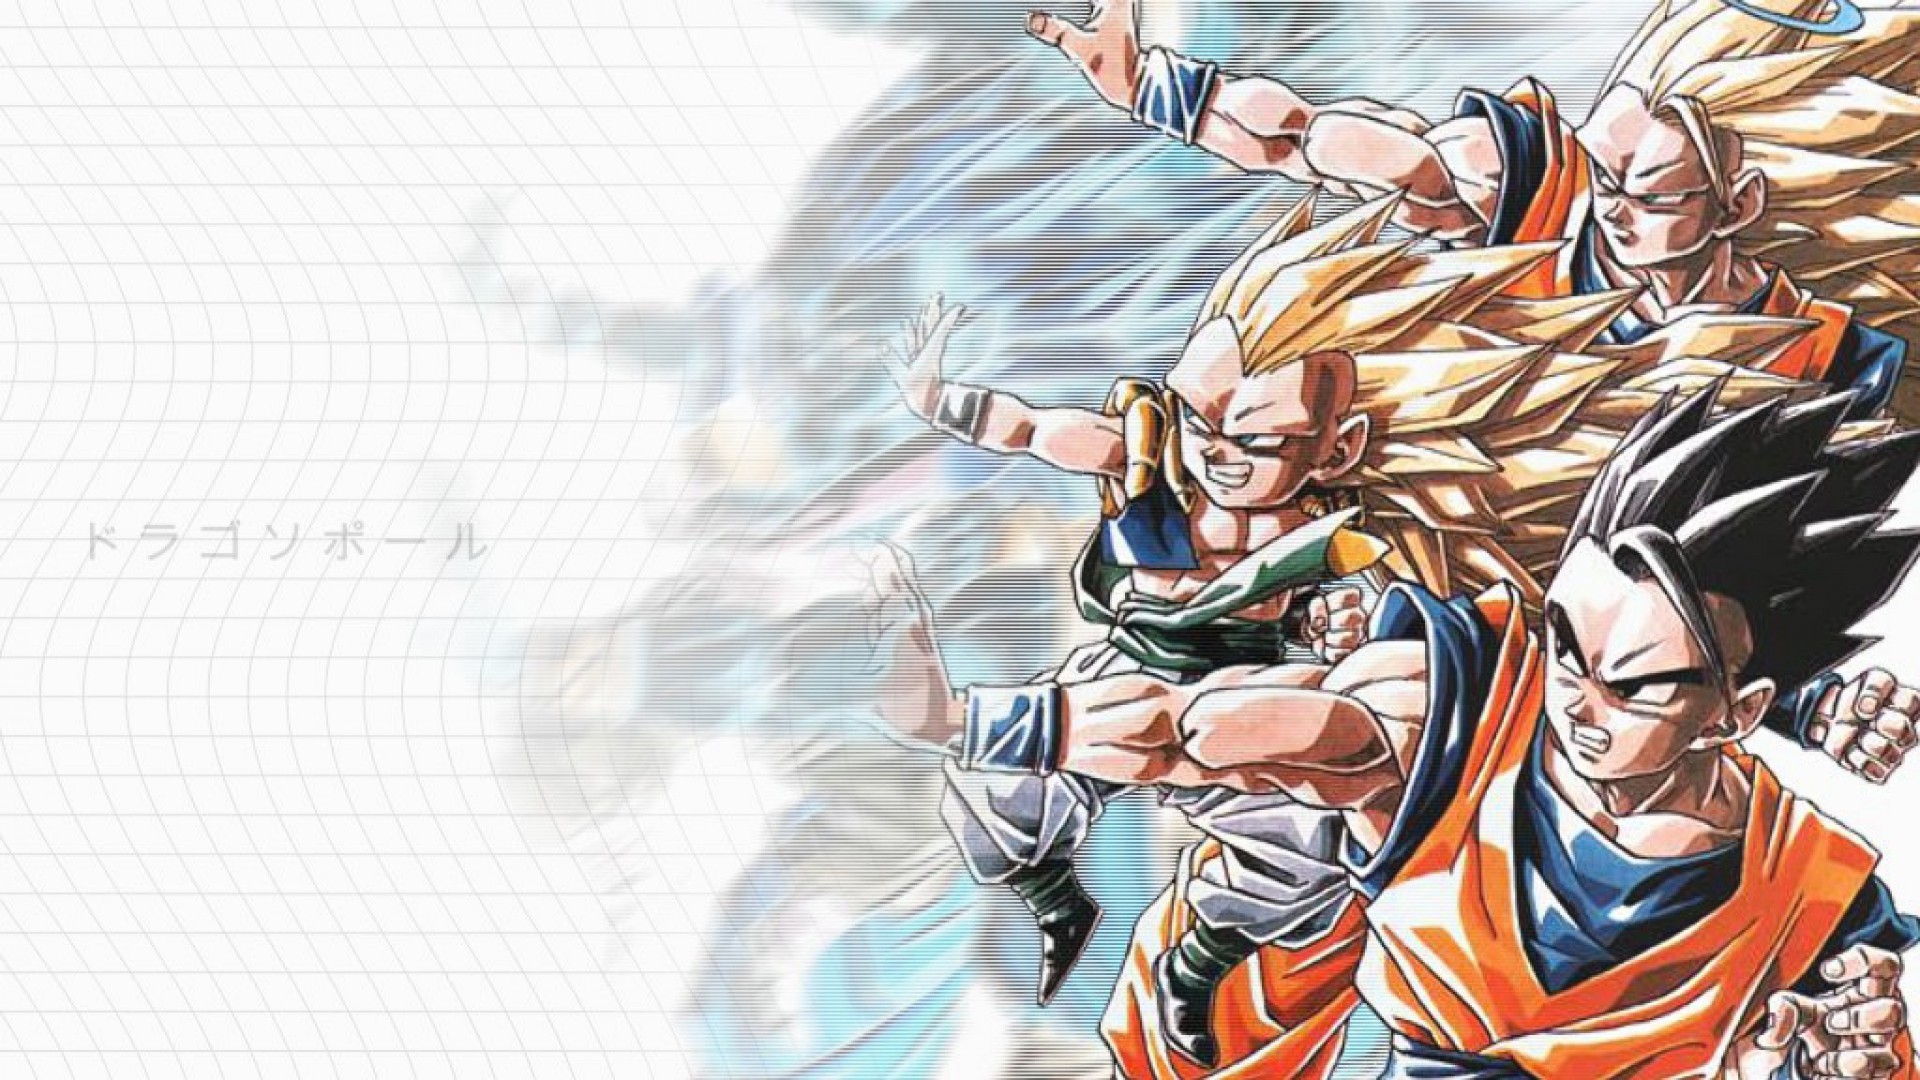 1920x1080 Dragon Ball Z HD Wallpapers and Backgrounds 1920Ã1200 Dragonball Z Wallpaper  (33 Wallpapers